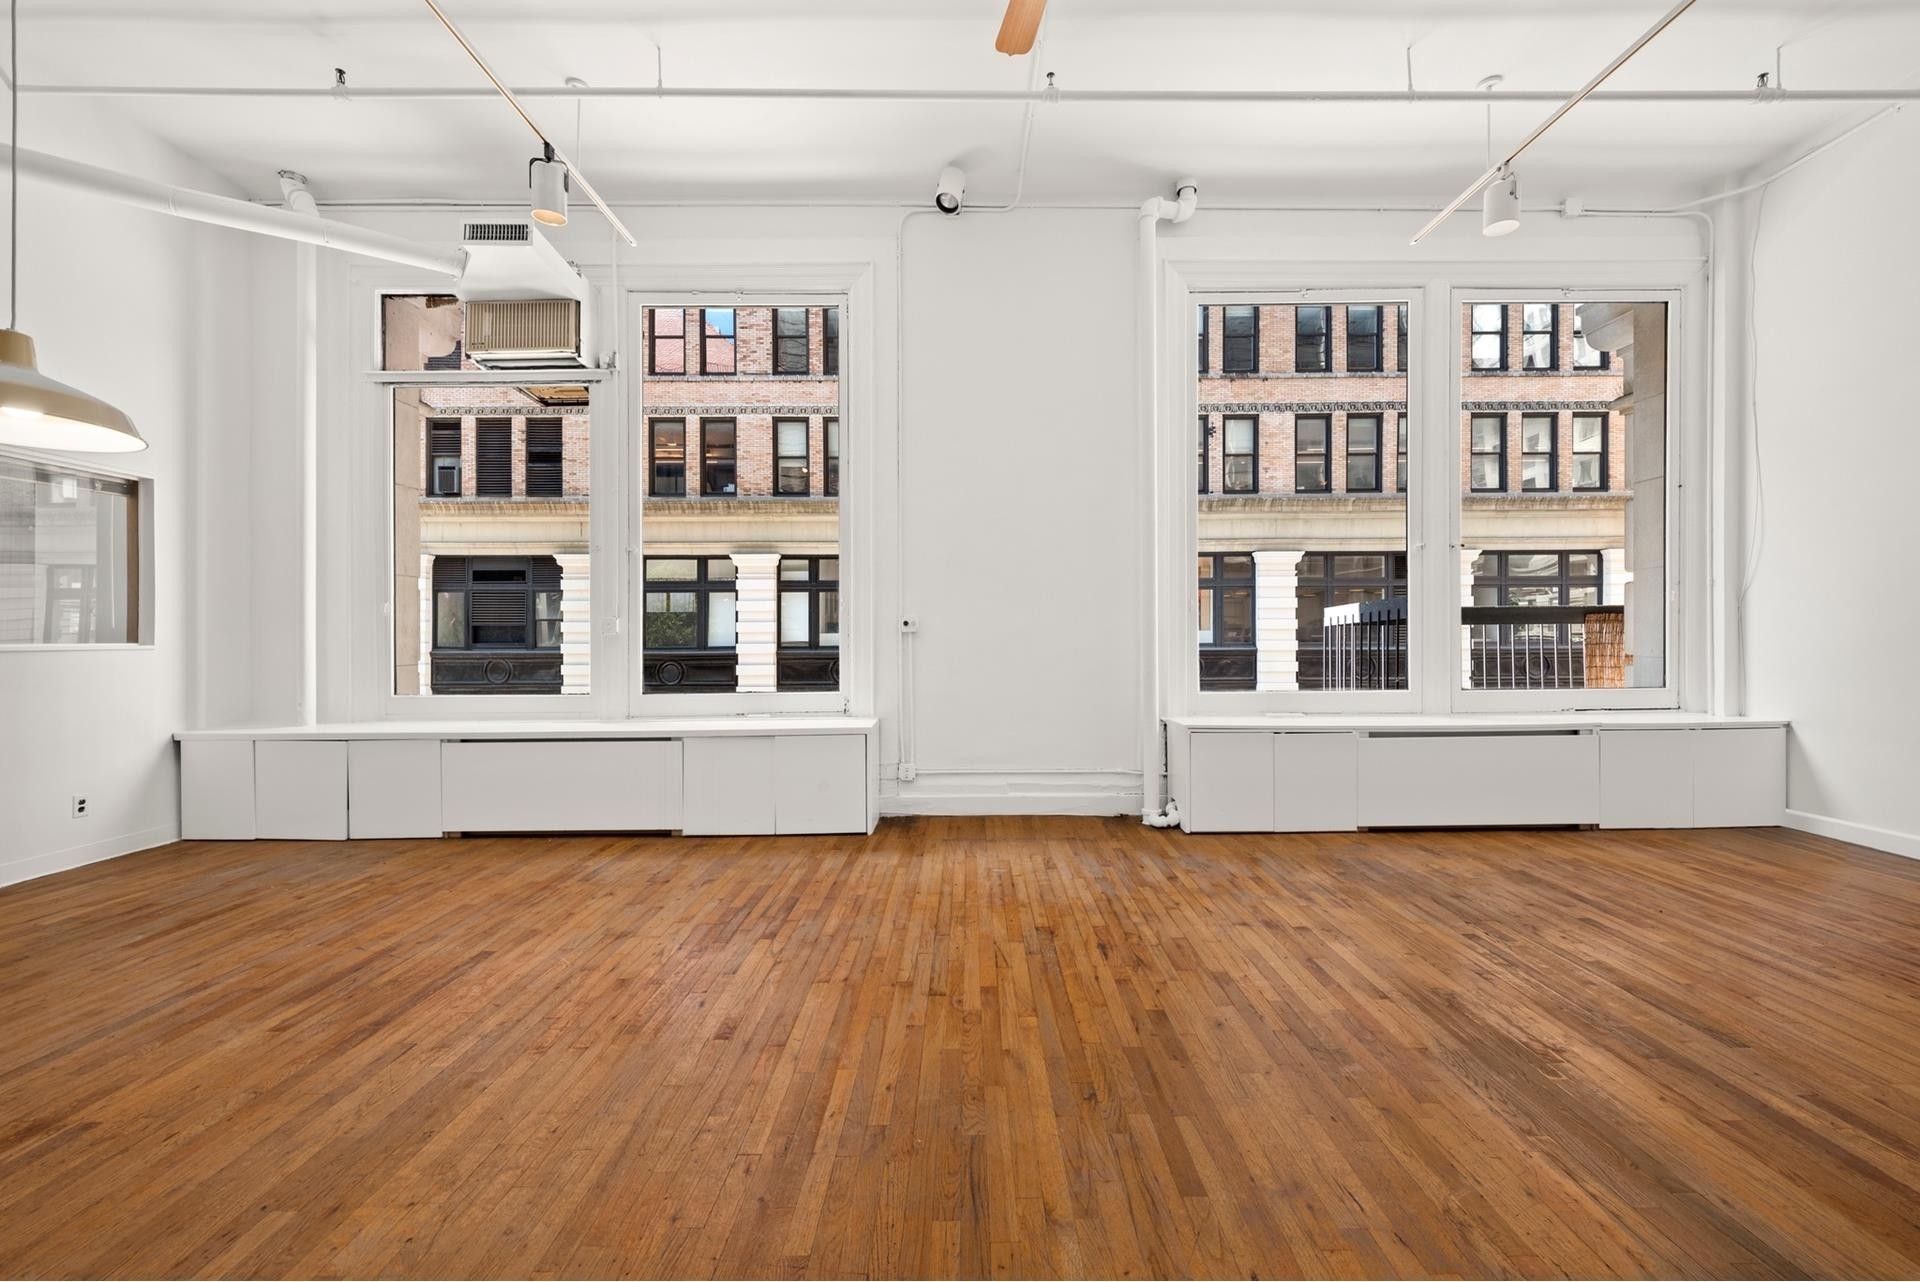 3. Co-op Properties for Sale at The Kensington, 73 FIFTH AVE, 2B Union Square, New York, NY 10003